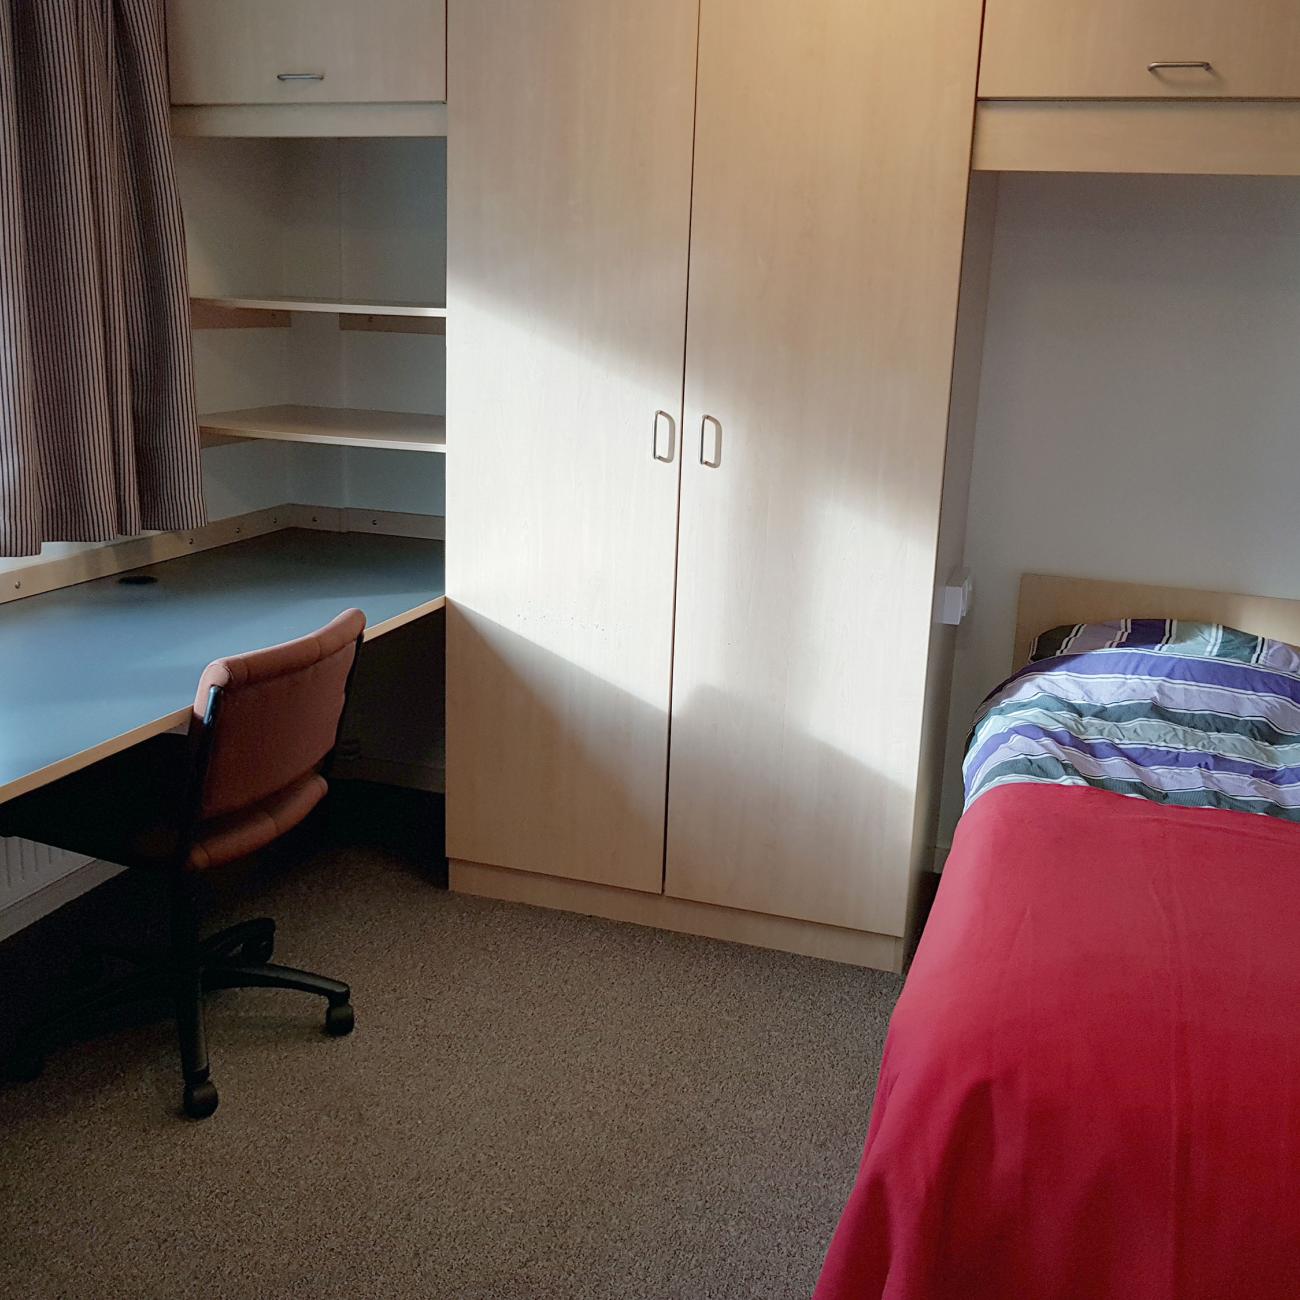 A student bedroom showing large double bed with red bed sheets, full height wooden wardrobes and cupboards, and a large desk. Light streams in through a large window.